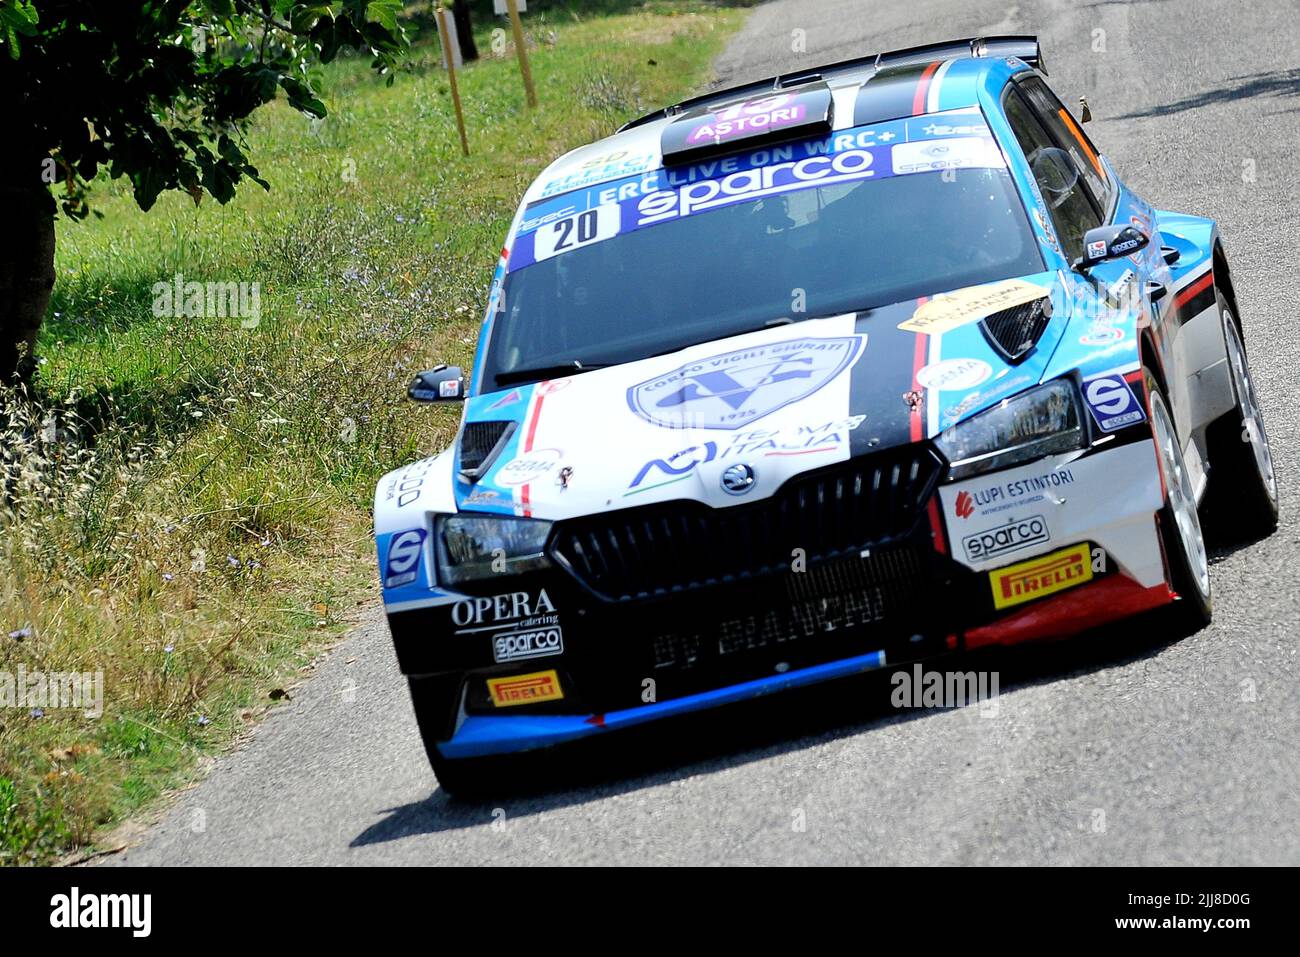 The driver Tommaso Ciuffi and his co-driverNicolò Gonella aboard their Skoda Fabia Rally 2 Evo  car, during the Santopadre - Fontana Liri stage of the 10 edition of the FIA European Rally Championship 'Rally di Roma Capitale' which was held in the Lazio region. Santopadre, Italy, 23 July 2022. (photo by Vincenzo Izzo/Sipa USA) Stock Photo